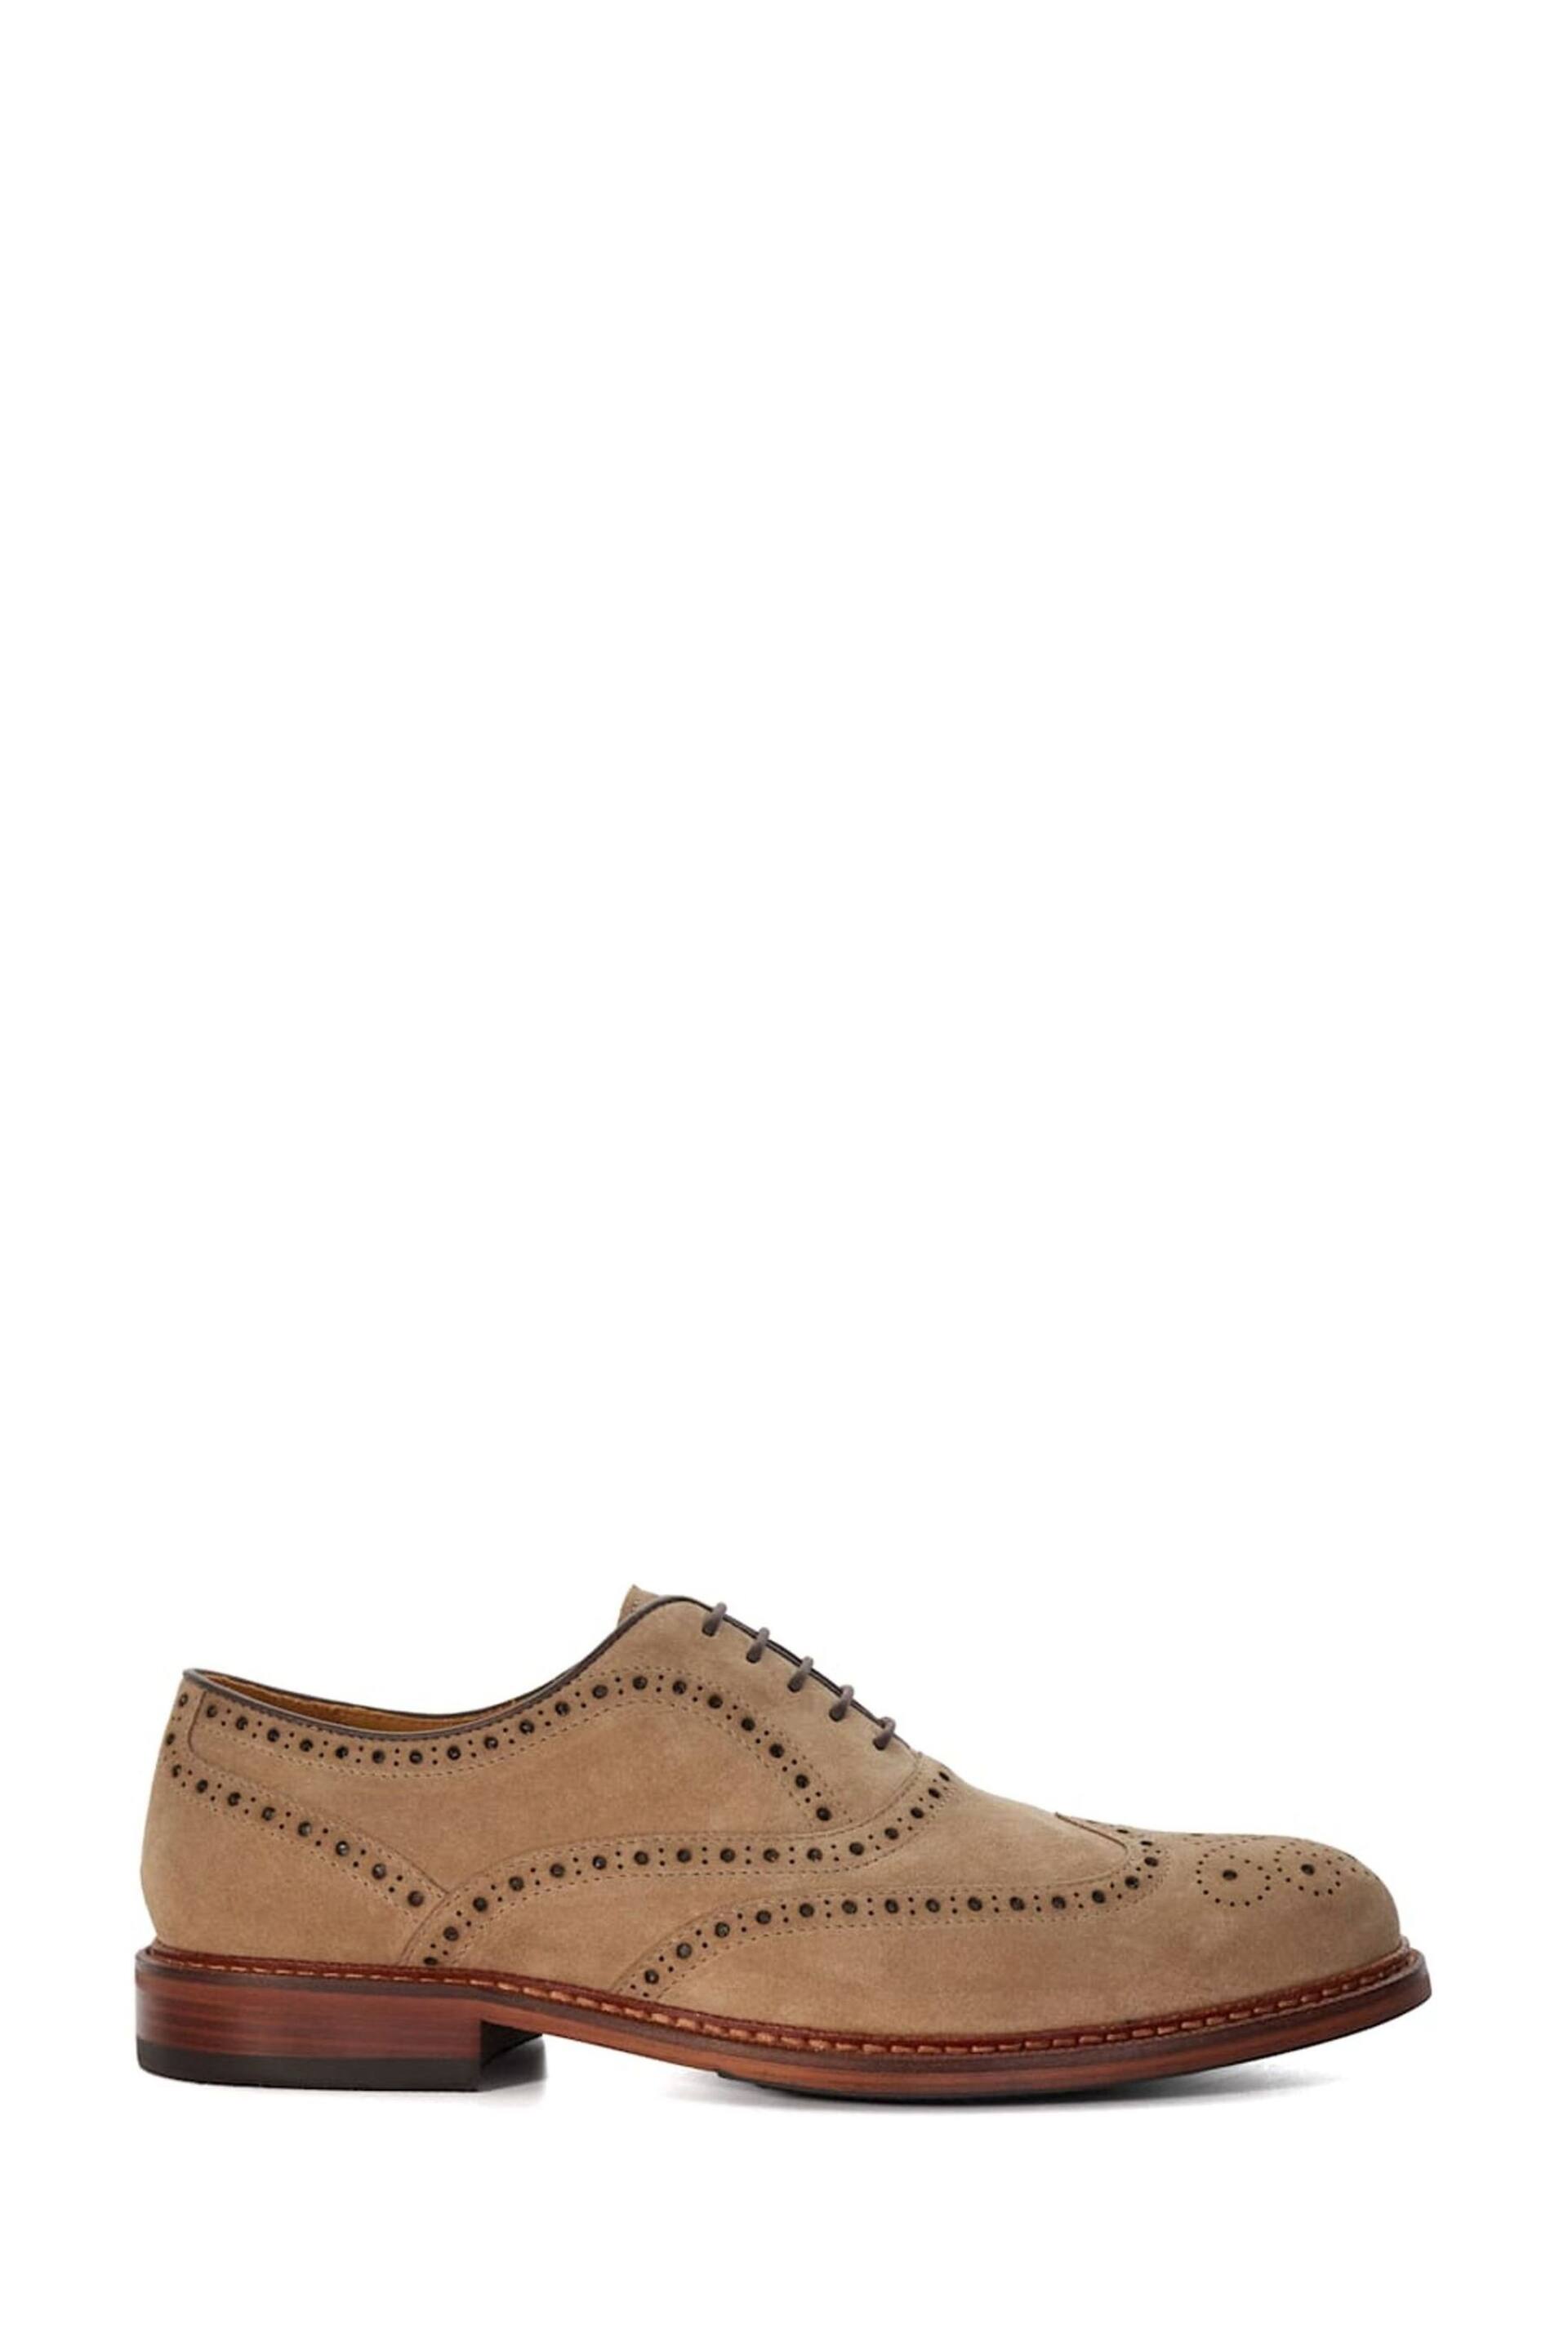 Dune London Brown Ground Solihull Oxford Brogues - Image 1 of 6